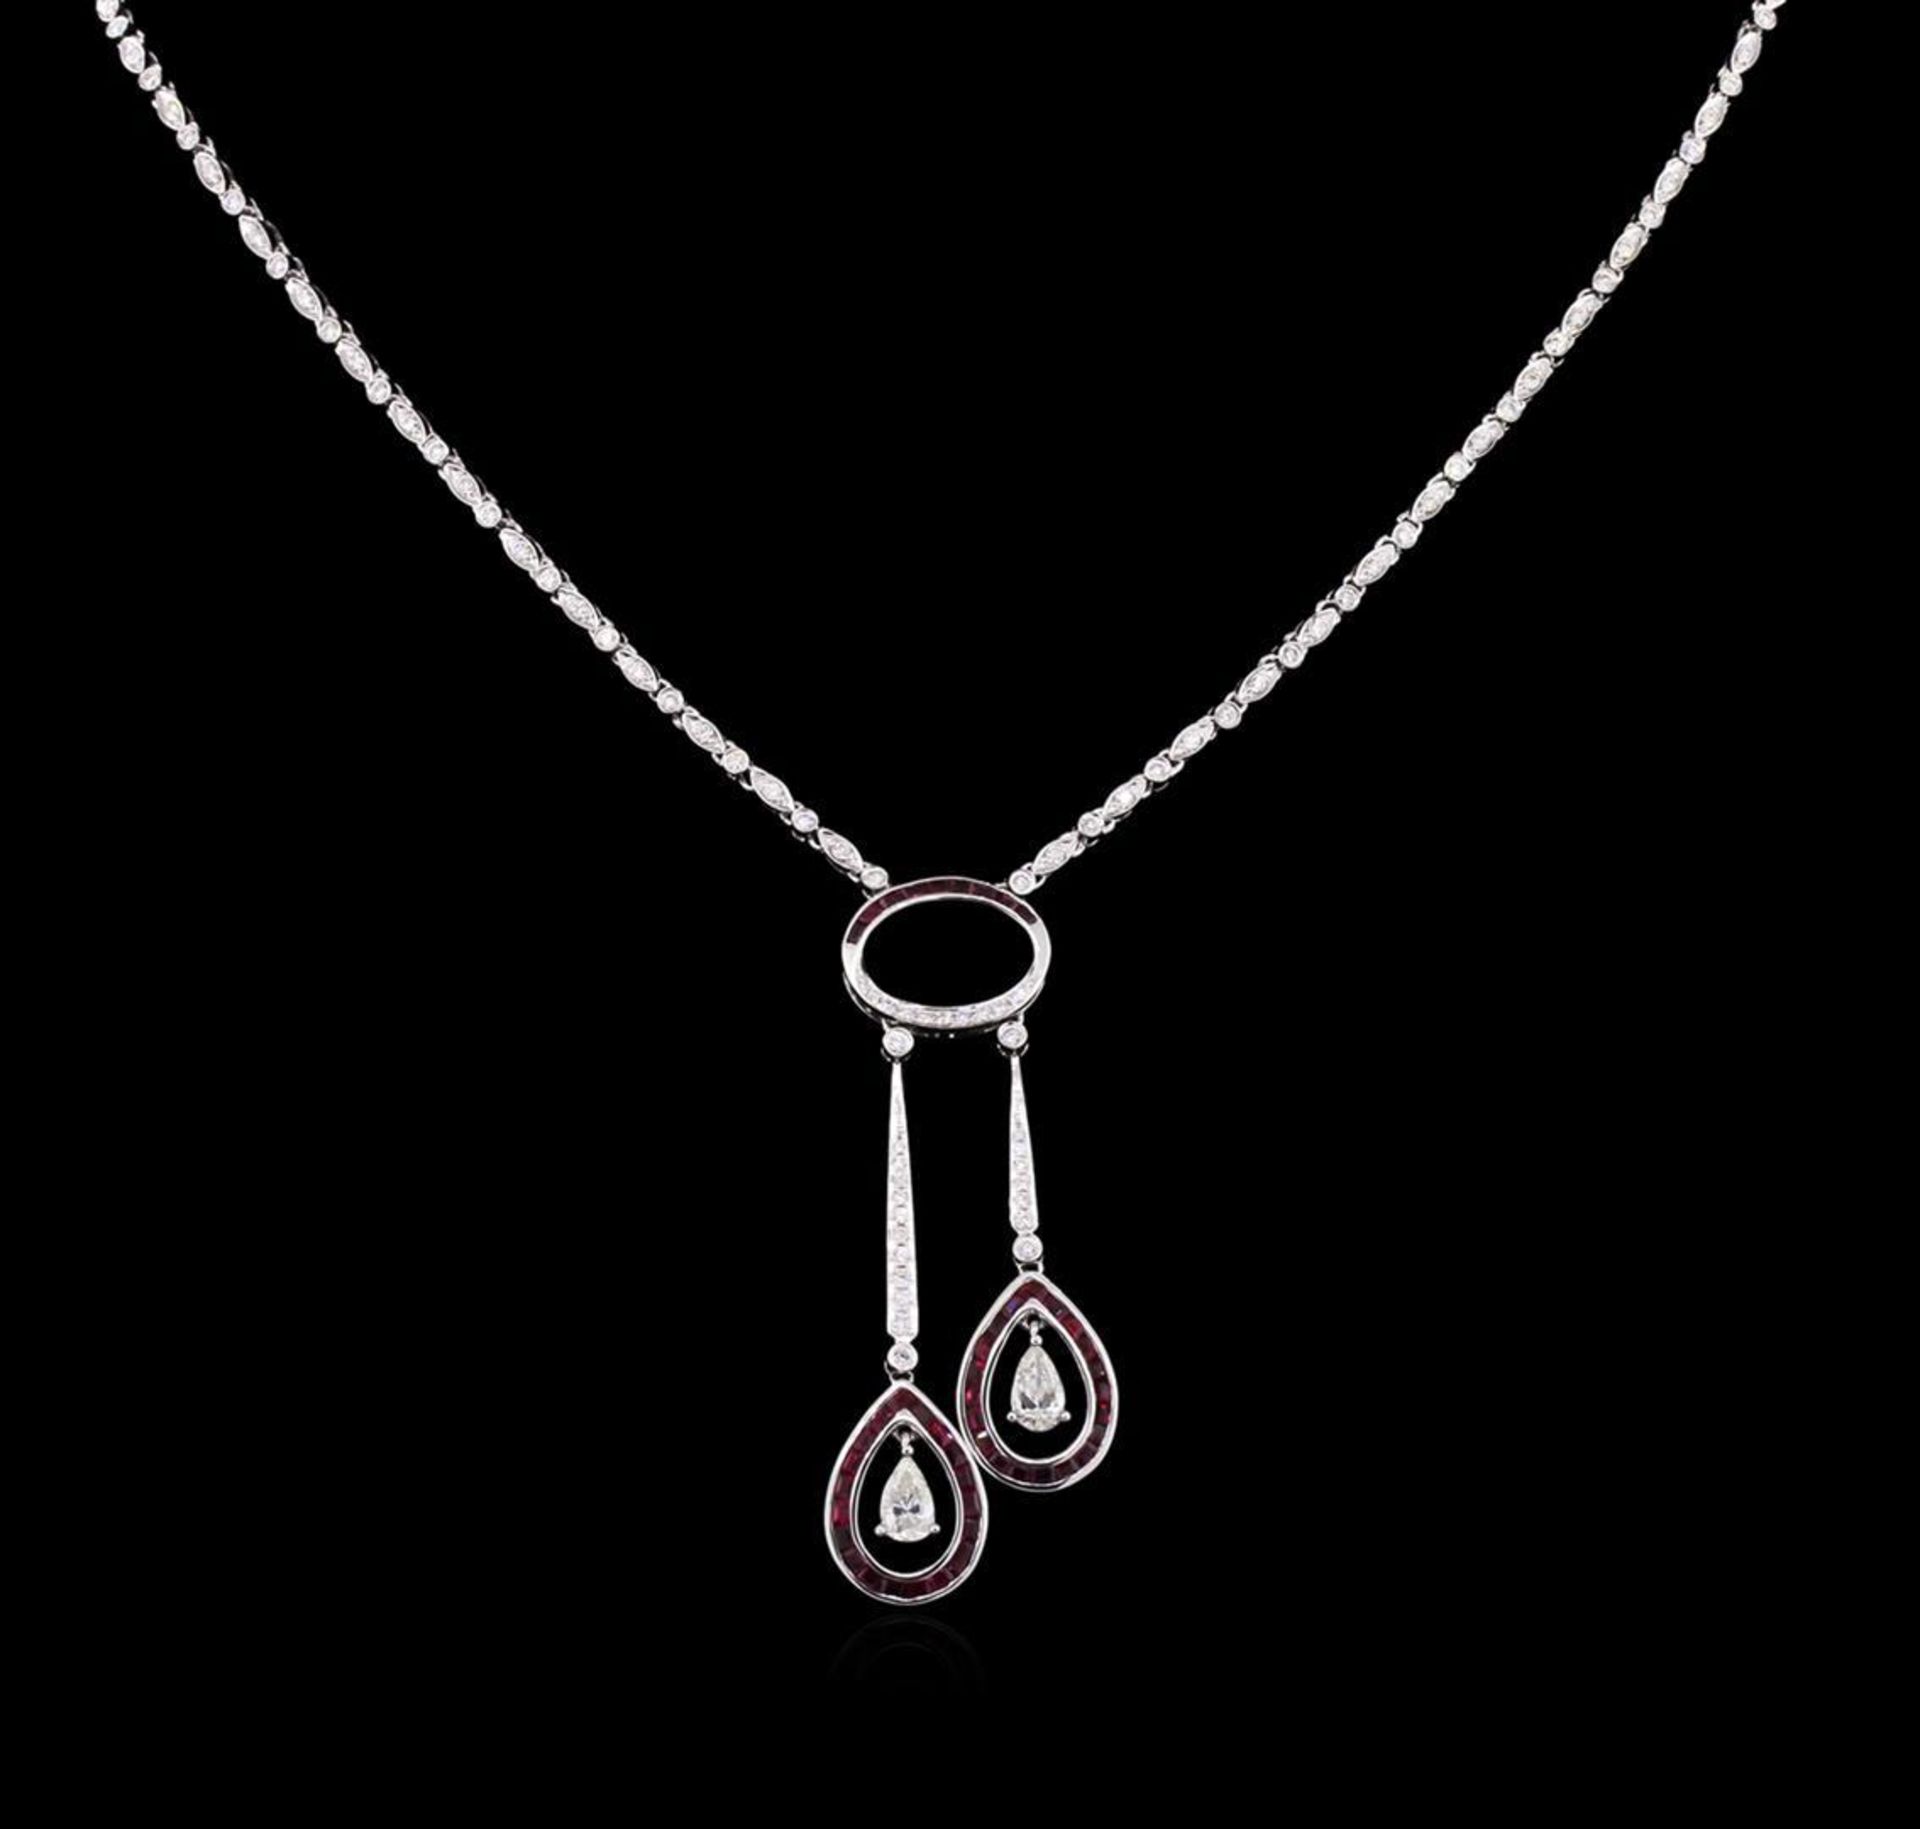 18KT White Gold 2.50 ctw Ruby and Diamond Necklace - Image 2 of 3